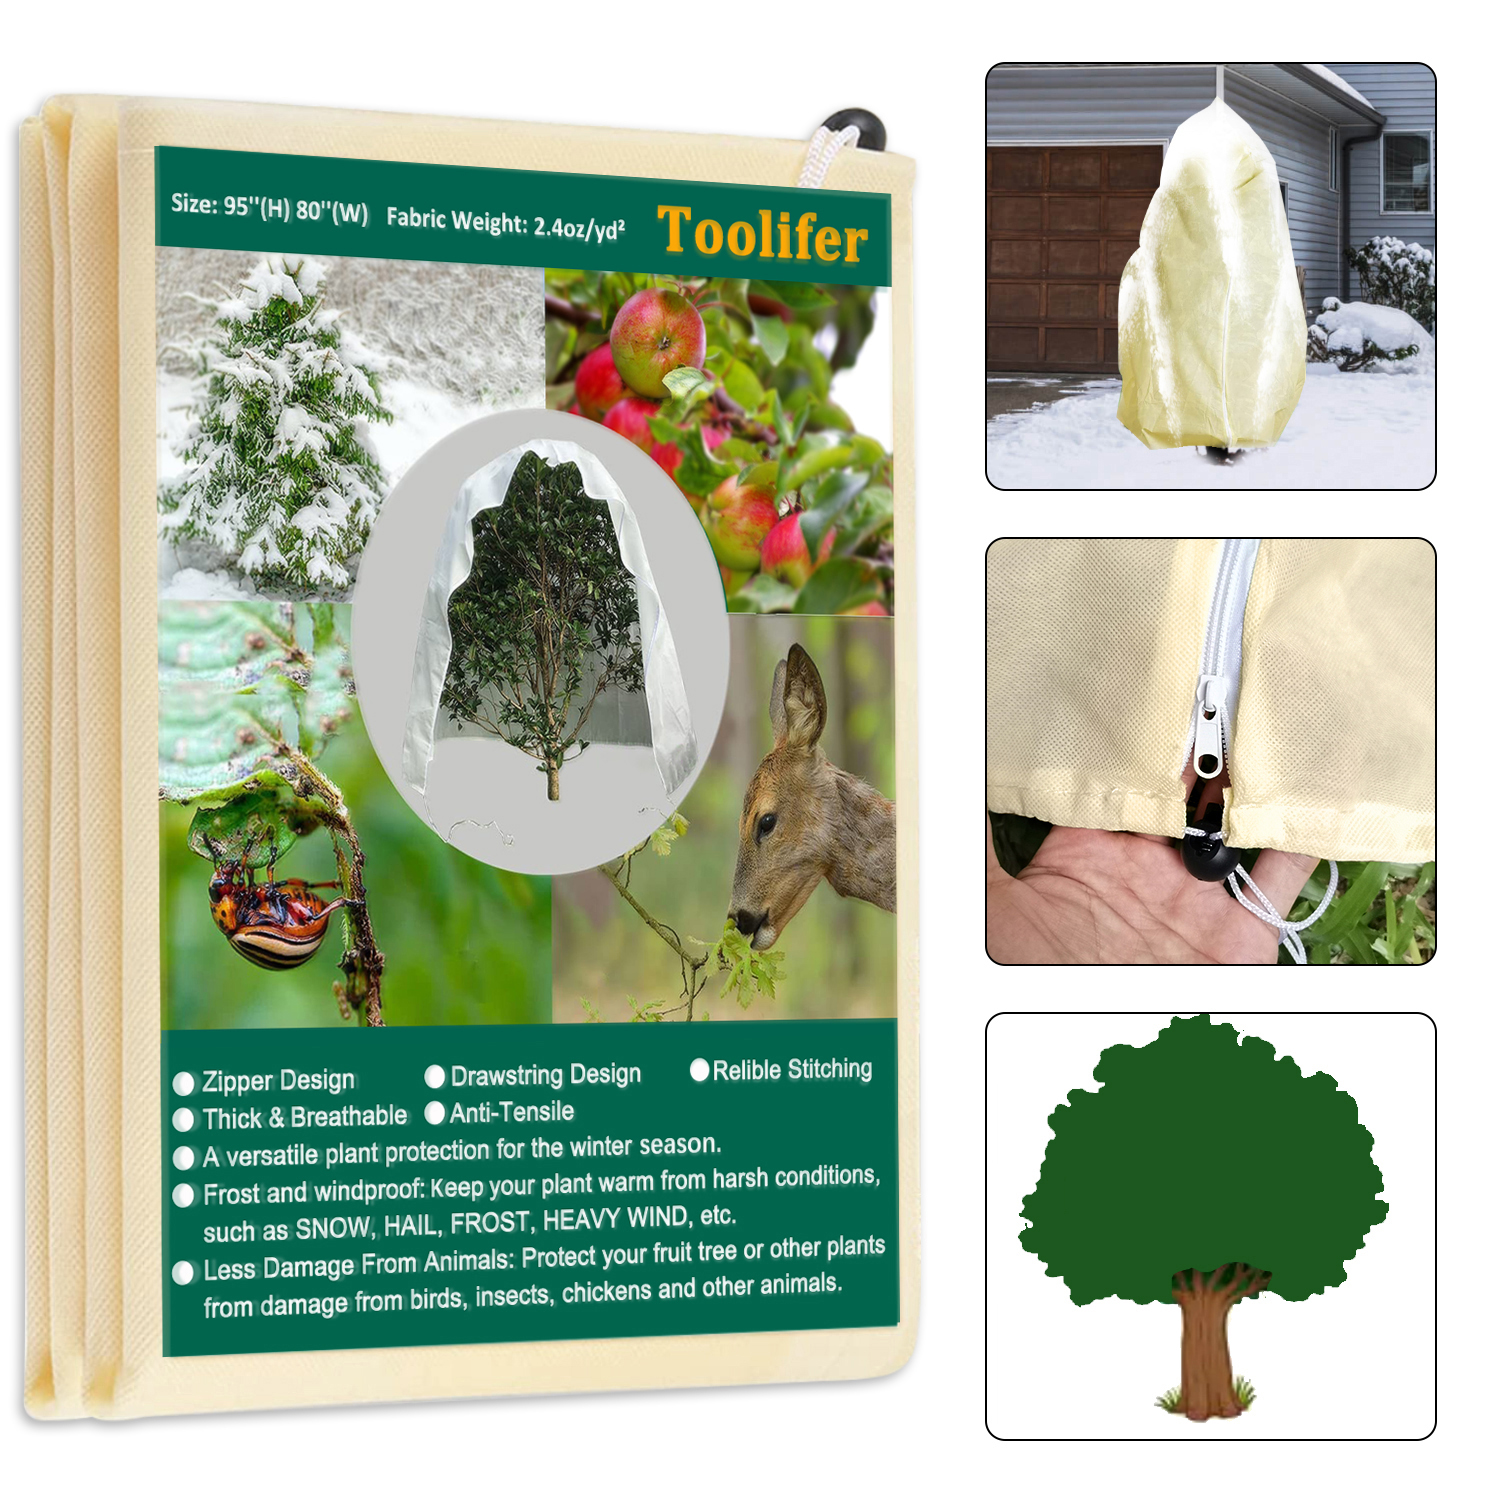 Toolifer Plant Covers Freeze Protection, 1 Pack 95”H X80”W 2.4oz Frost Blankets for Outdoor Plants Frost Cloth with Zipper Drawstring-Protect Trees Shrubs from Cold Frost Wind Pest